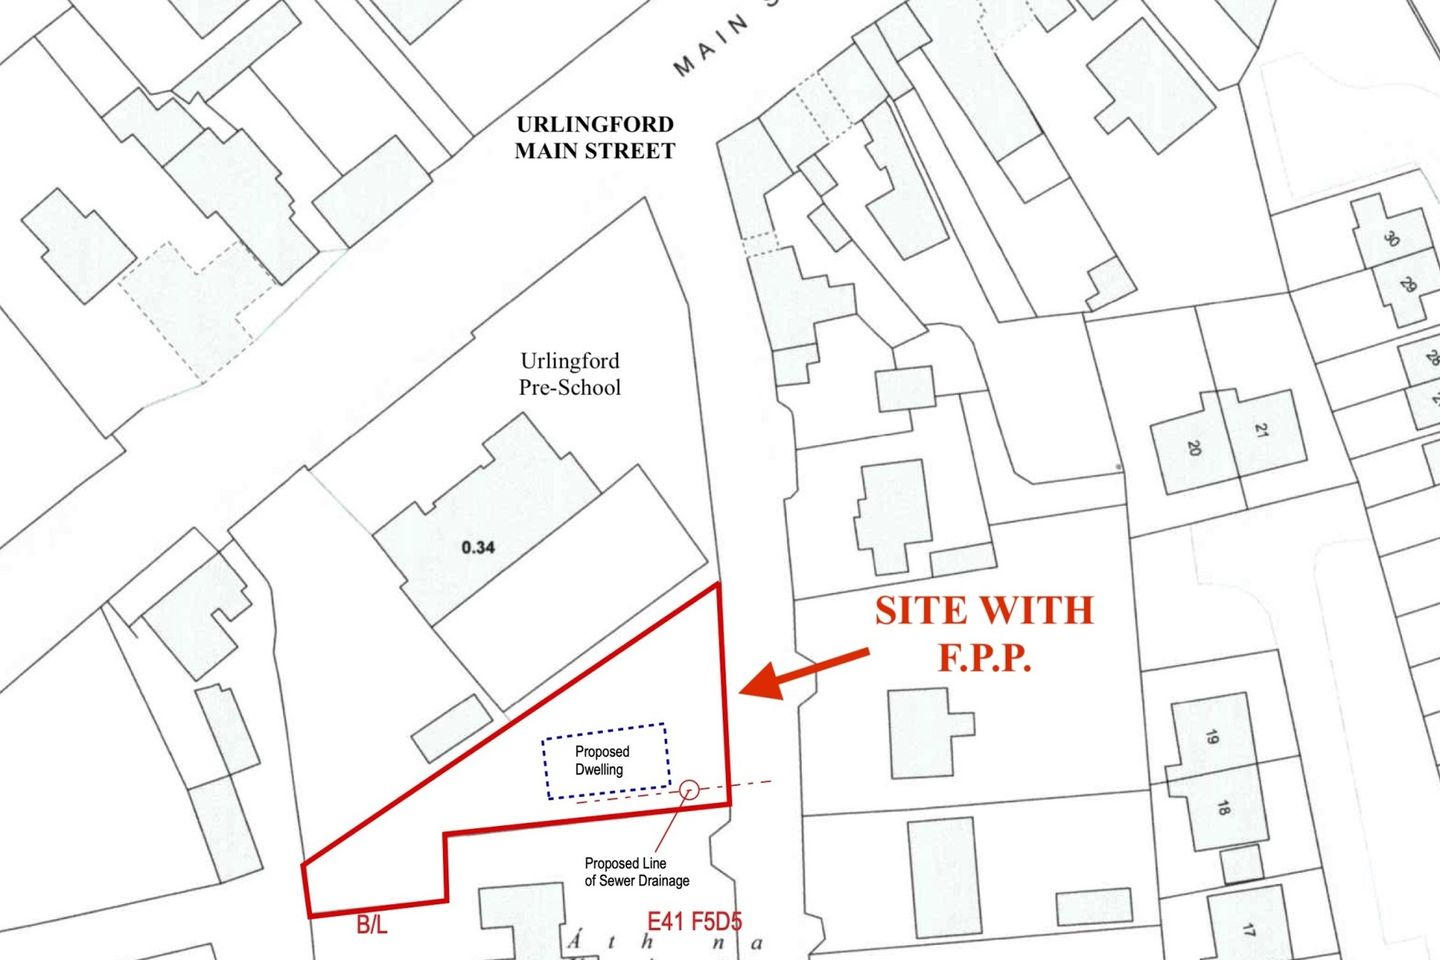 Residential Site With FPP, Togher Road, Urlingford, Co. Kilkenny